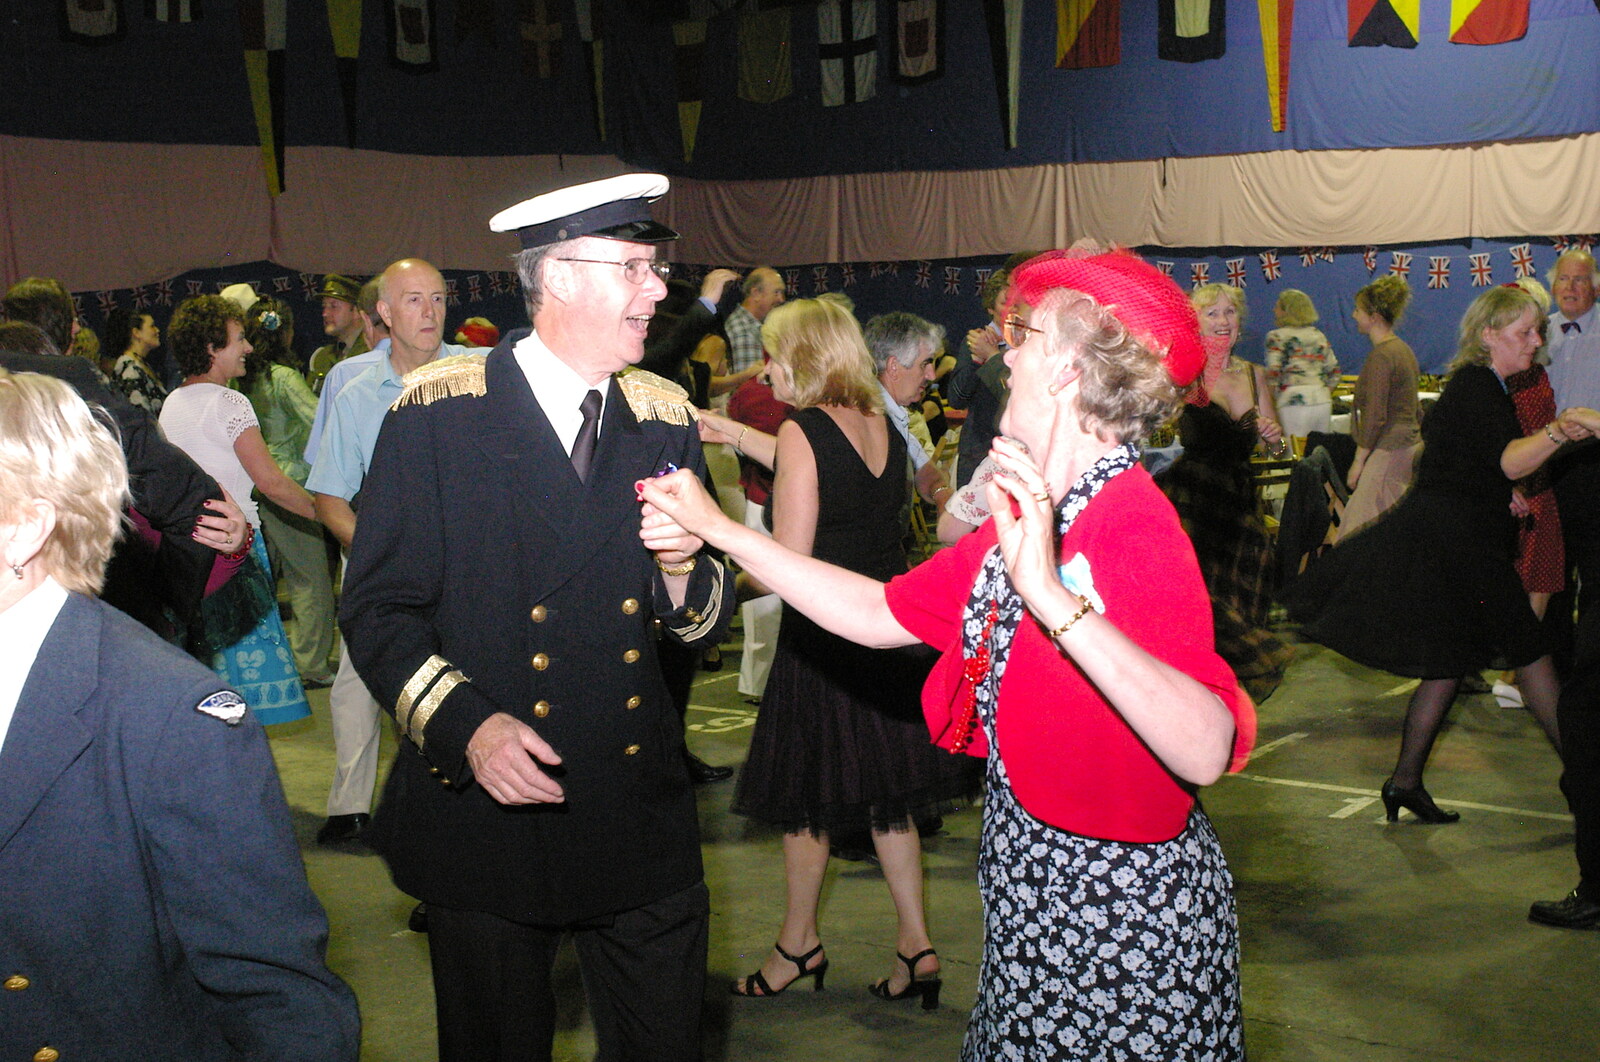 The admiral dances from Another 1940s Dance, Ellough Airfield, Beccles, Suffolk - 24th June 2005